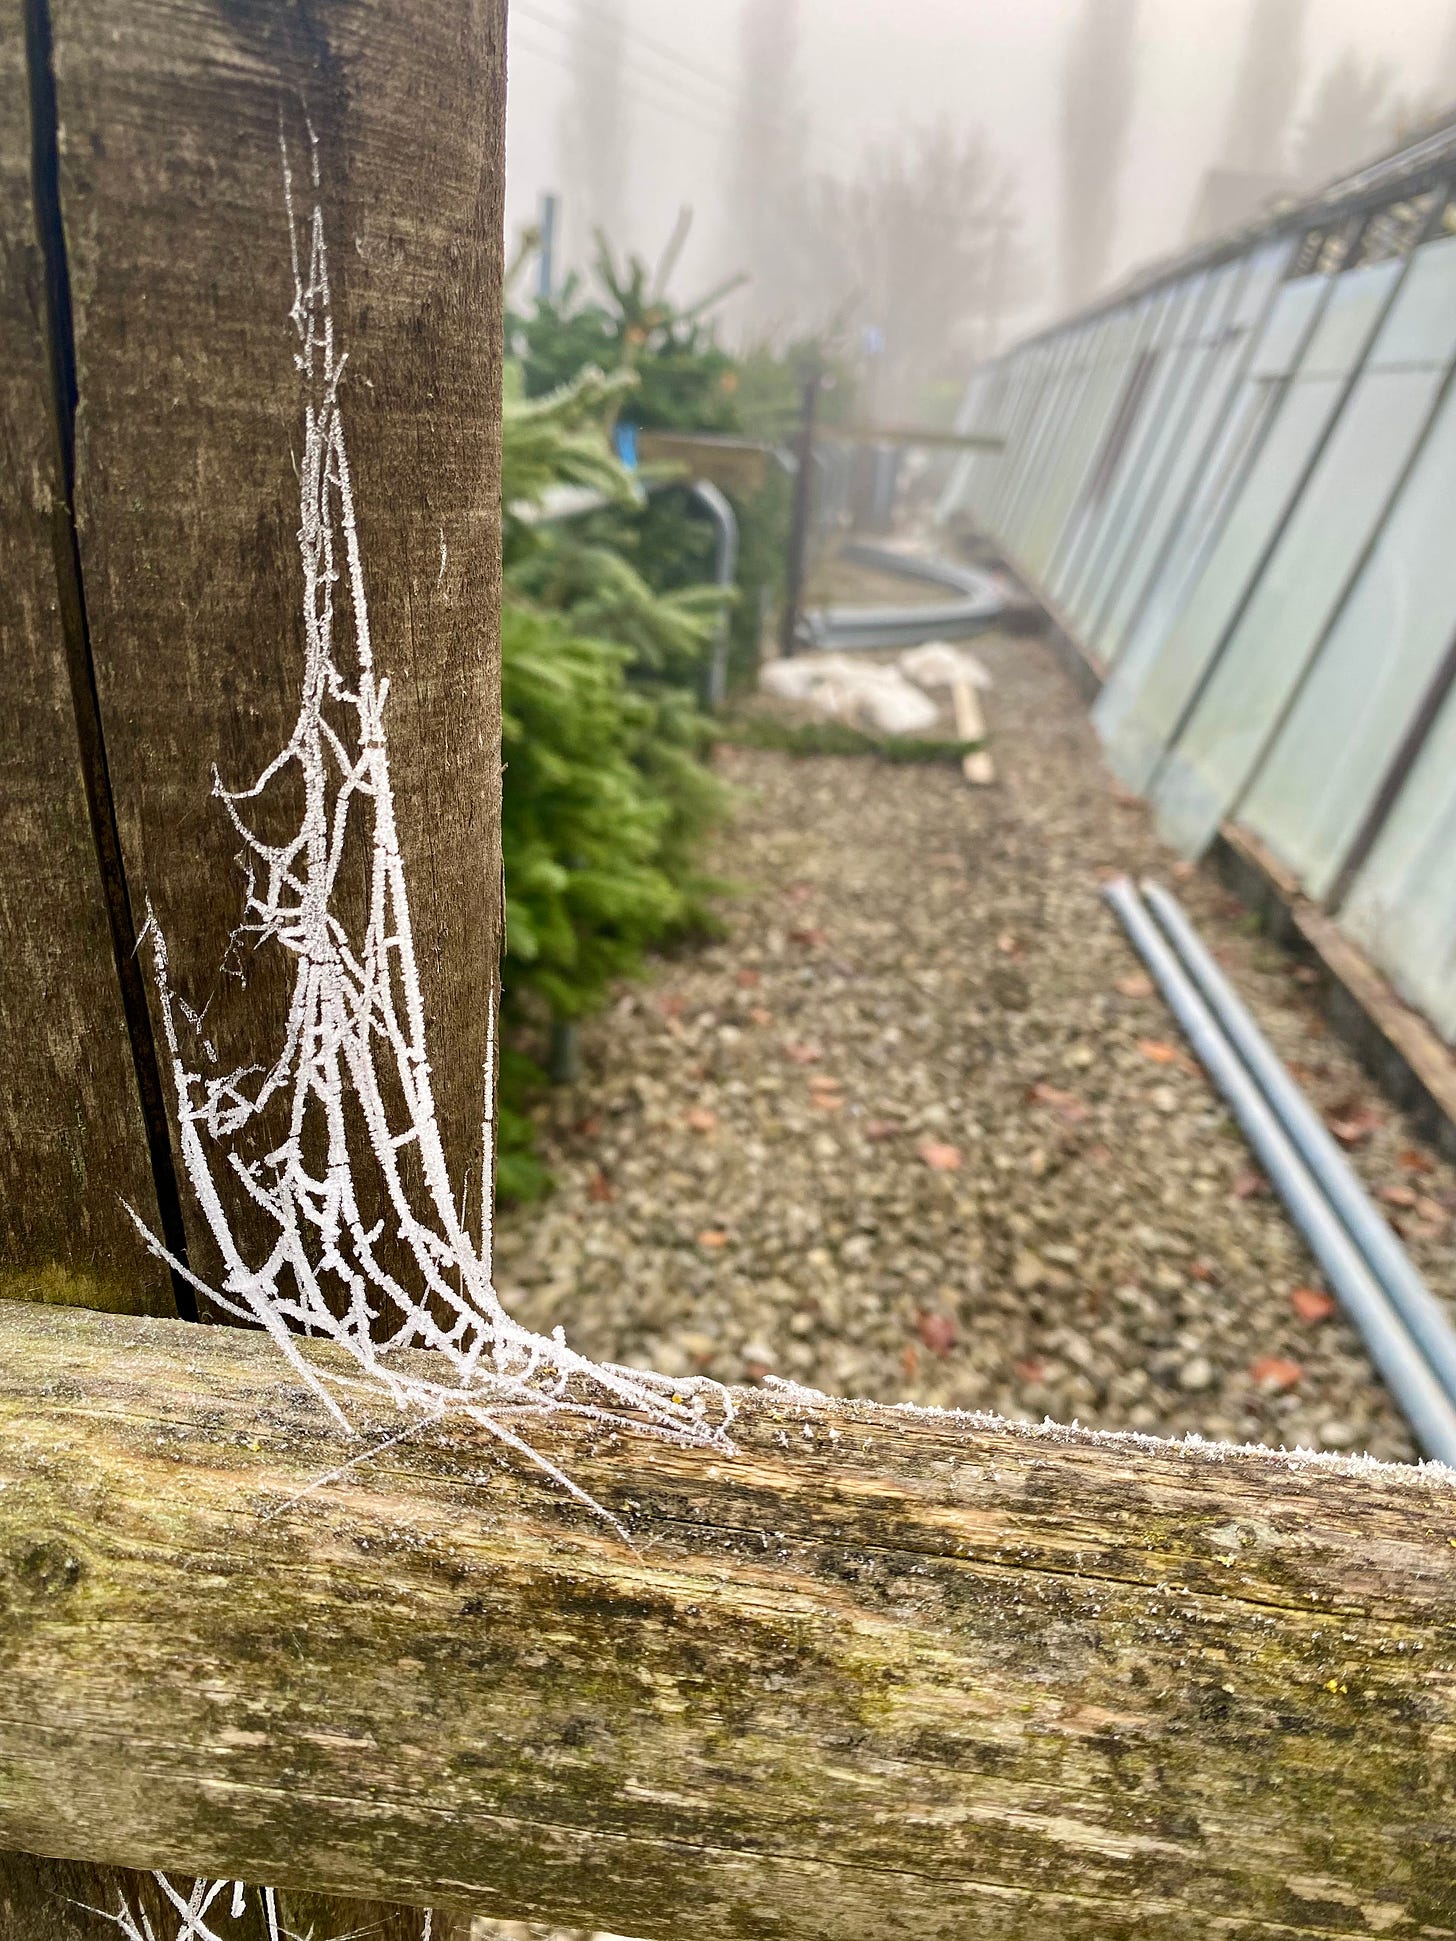 A close-up photo of an icy spider web with Christmas trees in the background